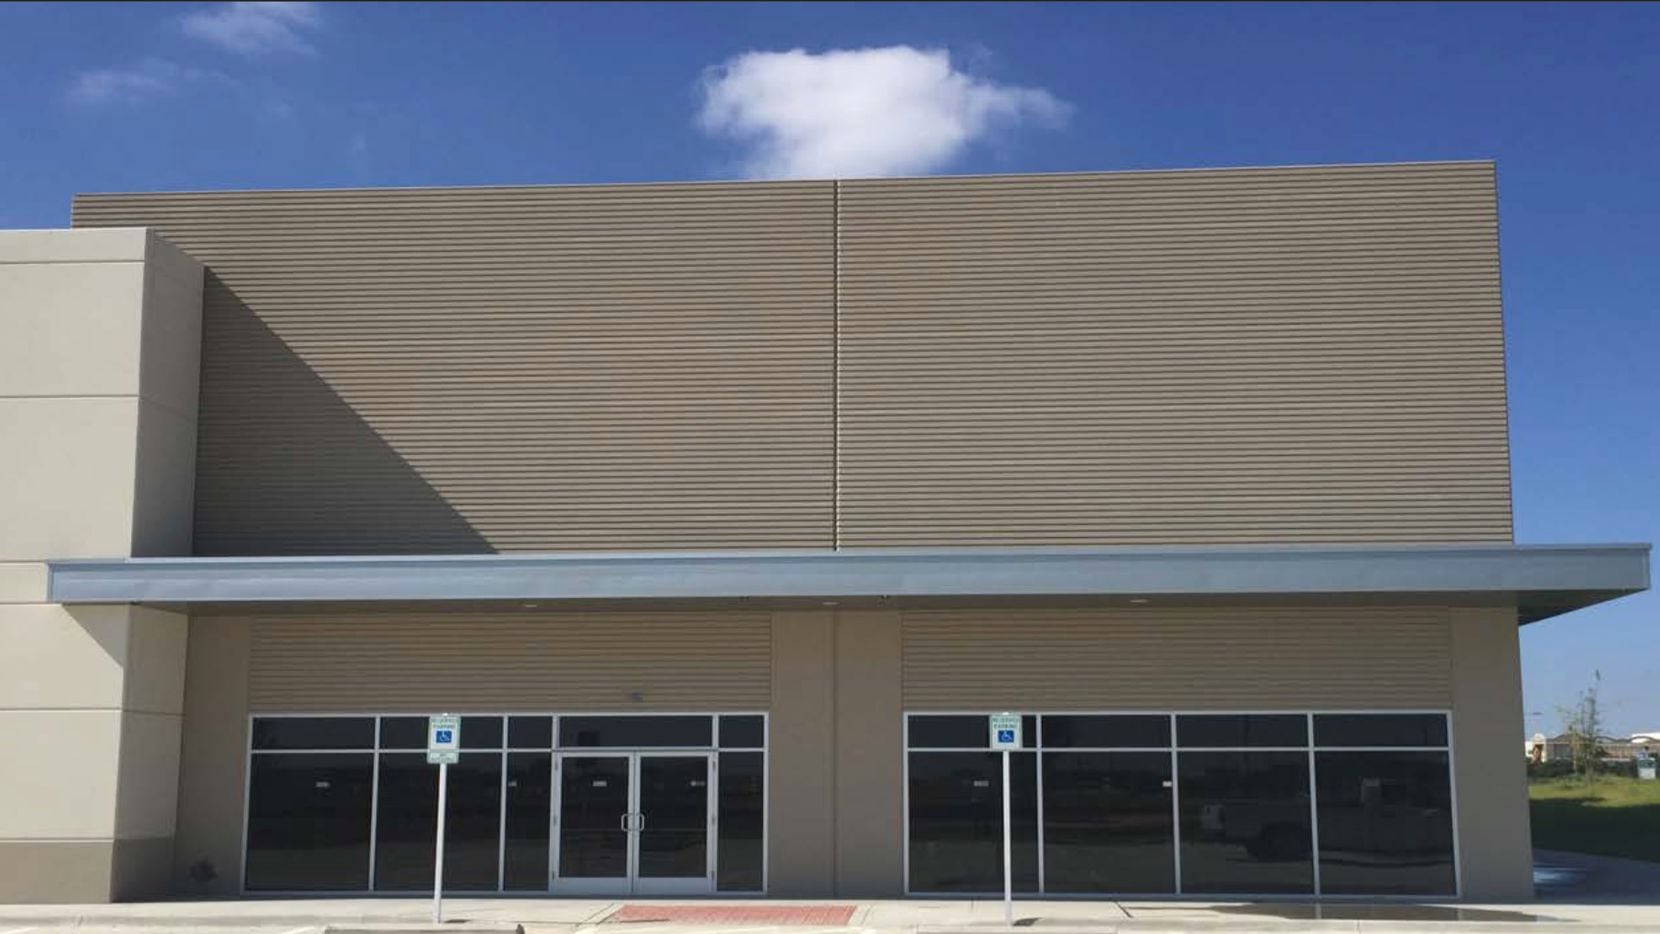 DFW Global Logistics Centre includes more than 600,000 square feet of warehouse and...